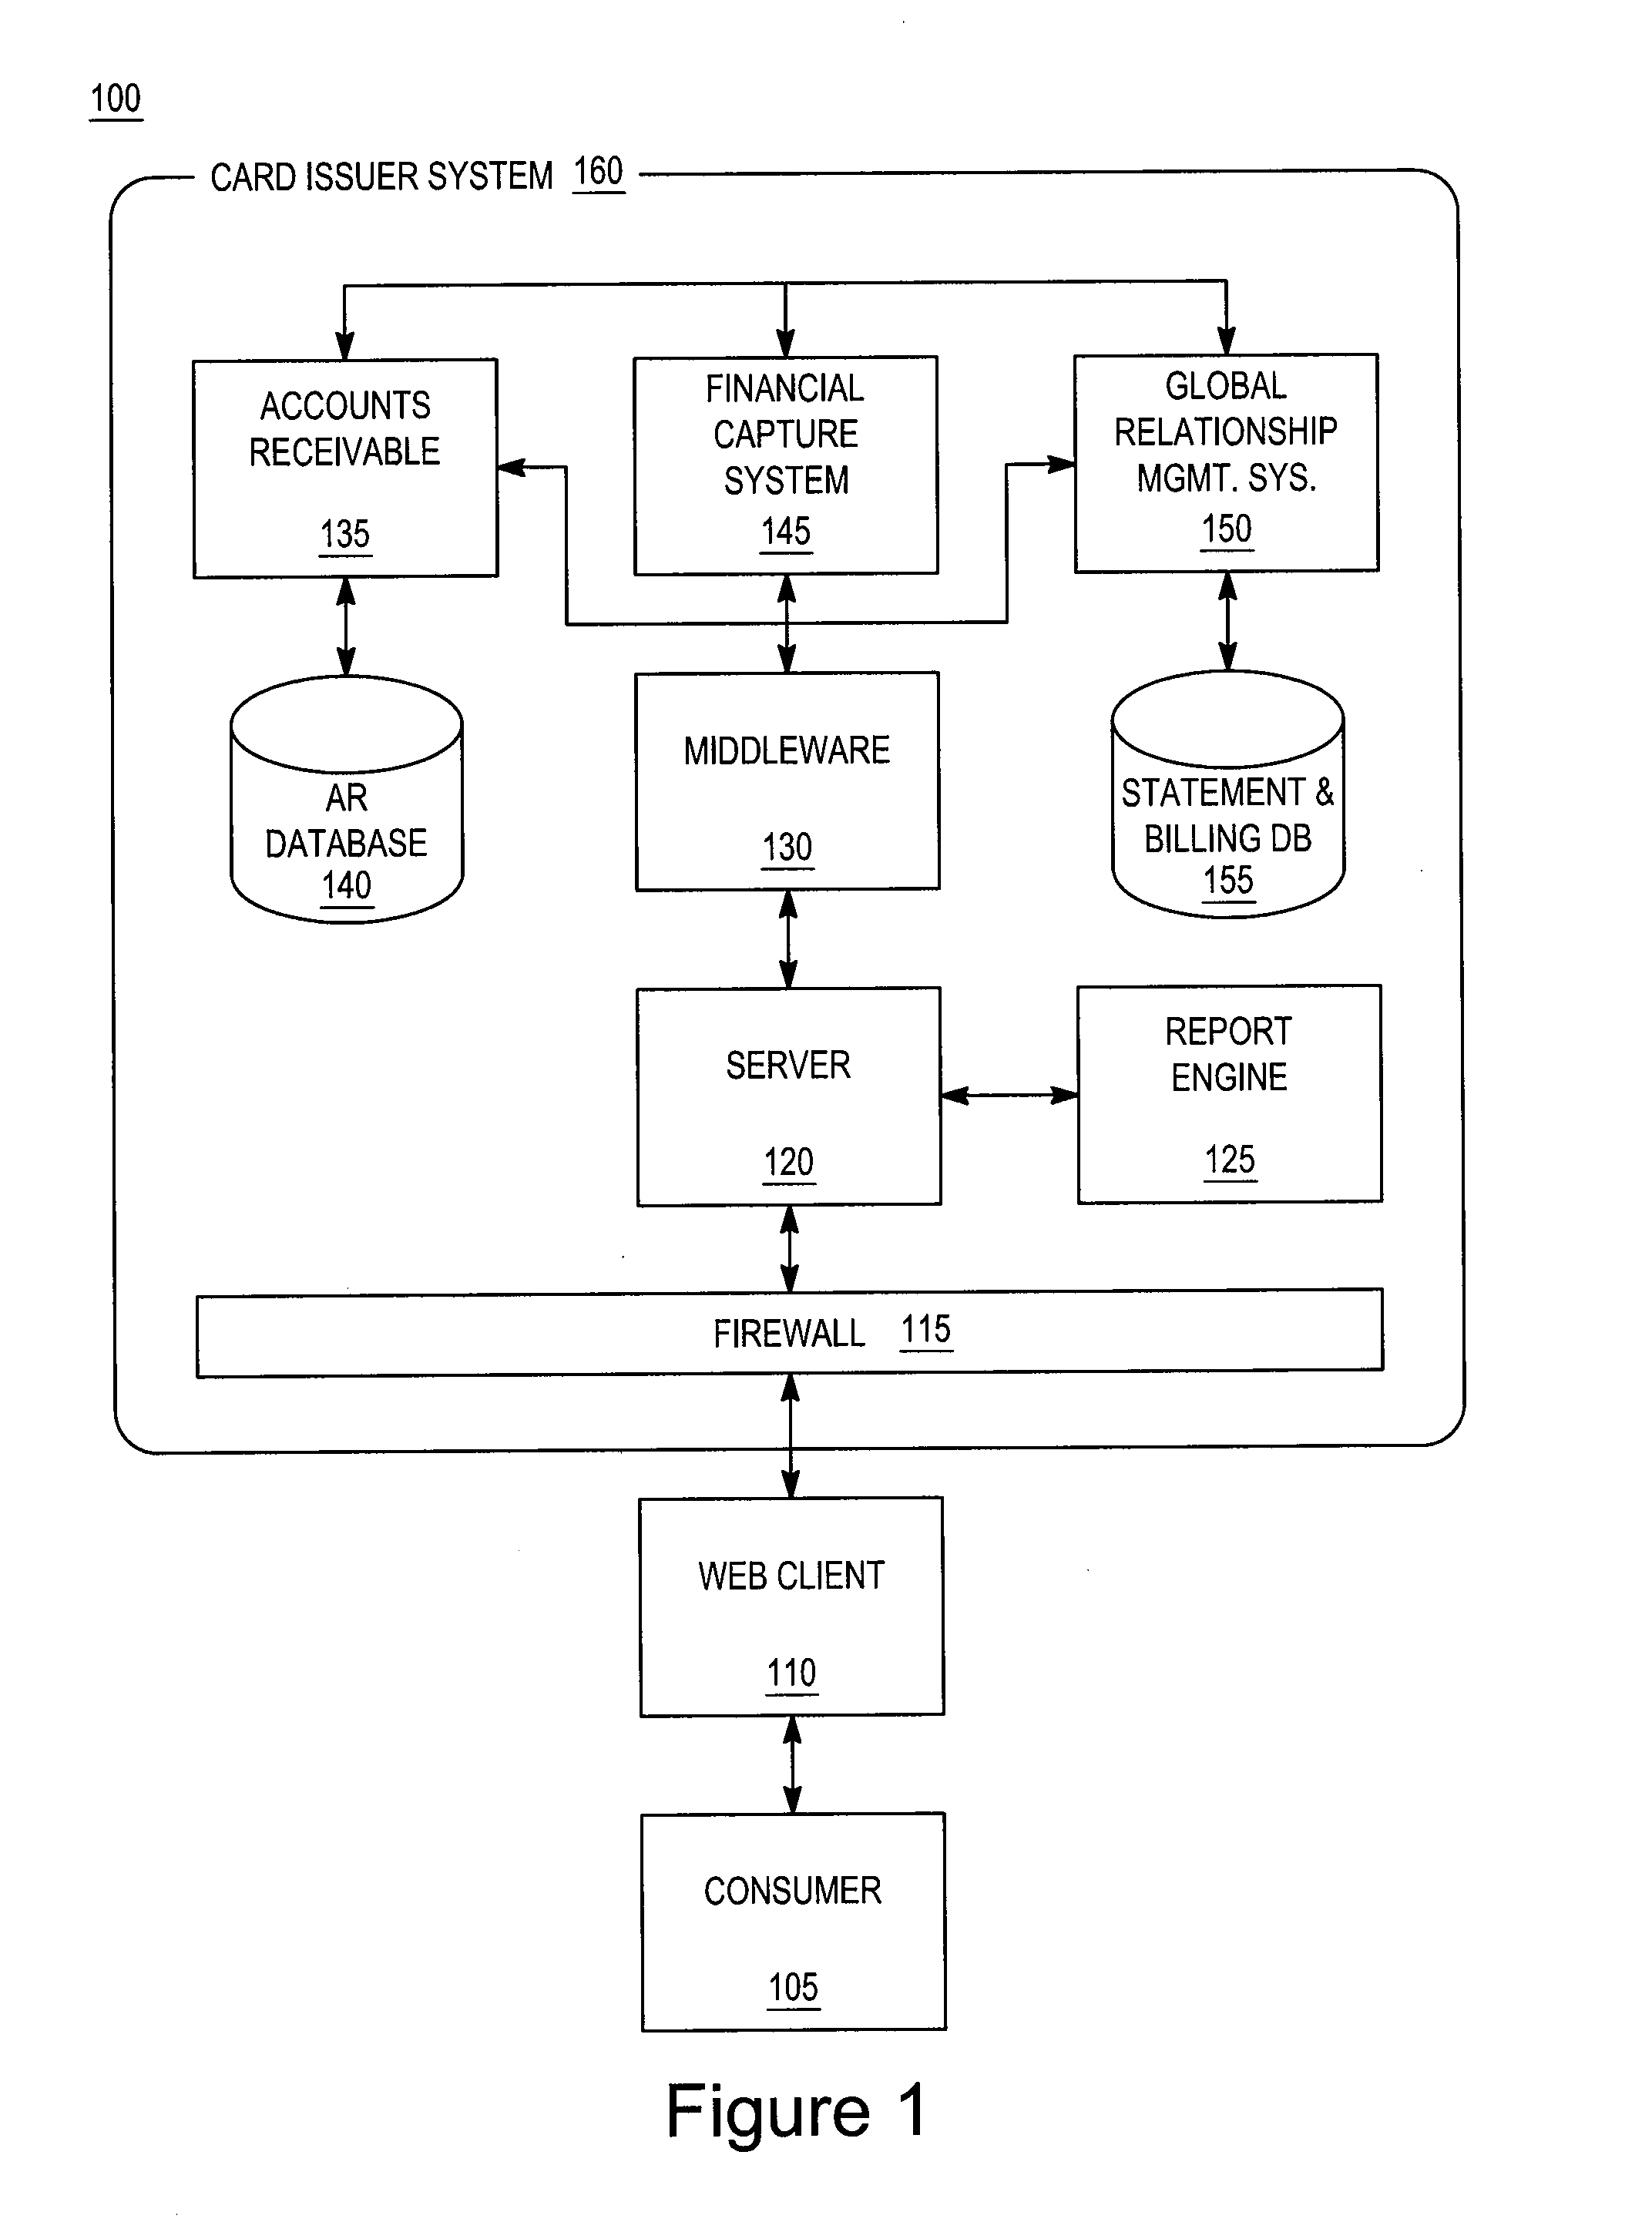 System and method for determining positive behavior and/or making awards based upon geographic location